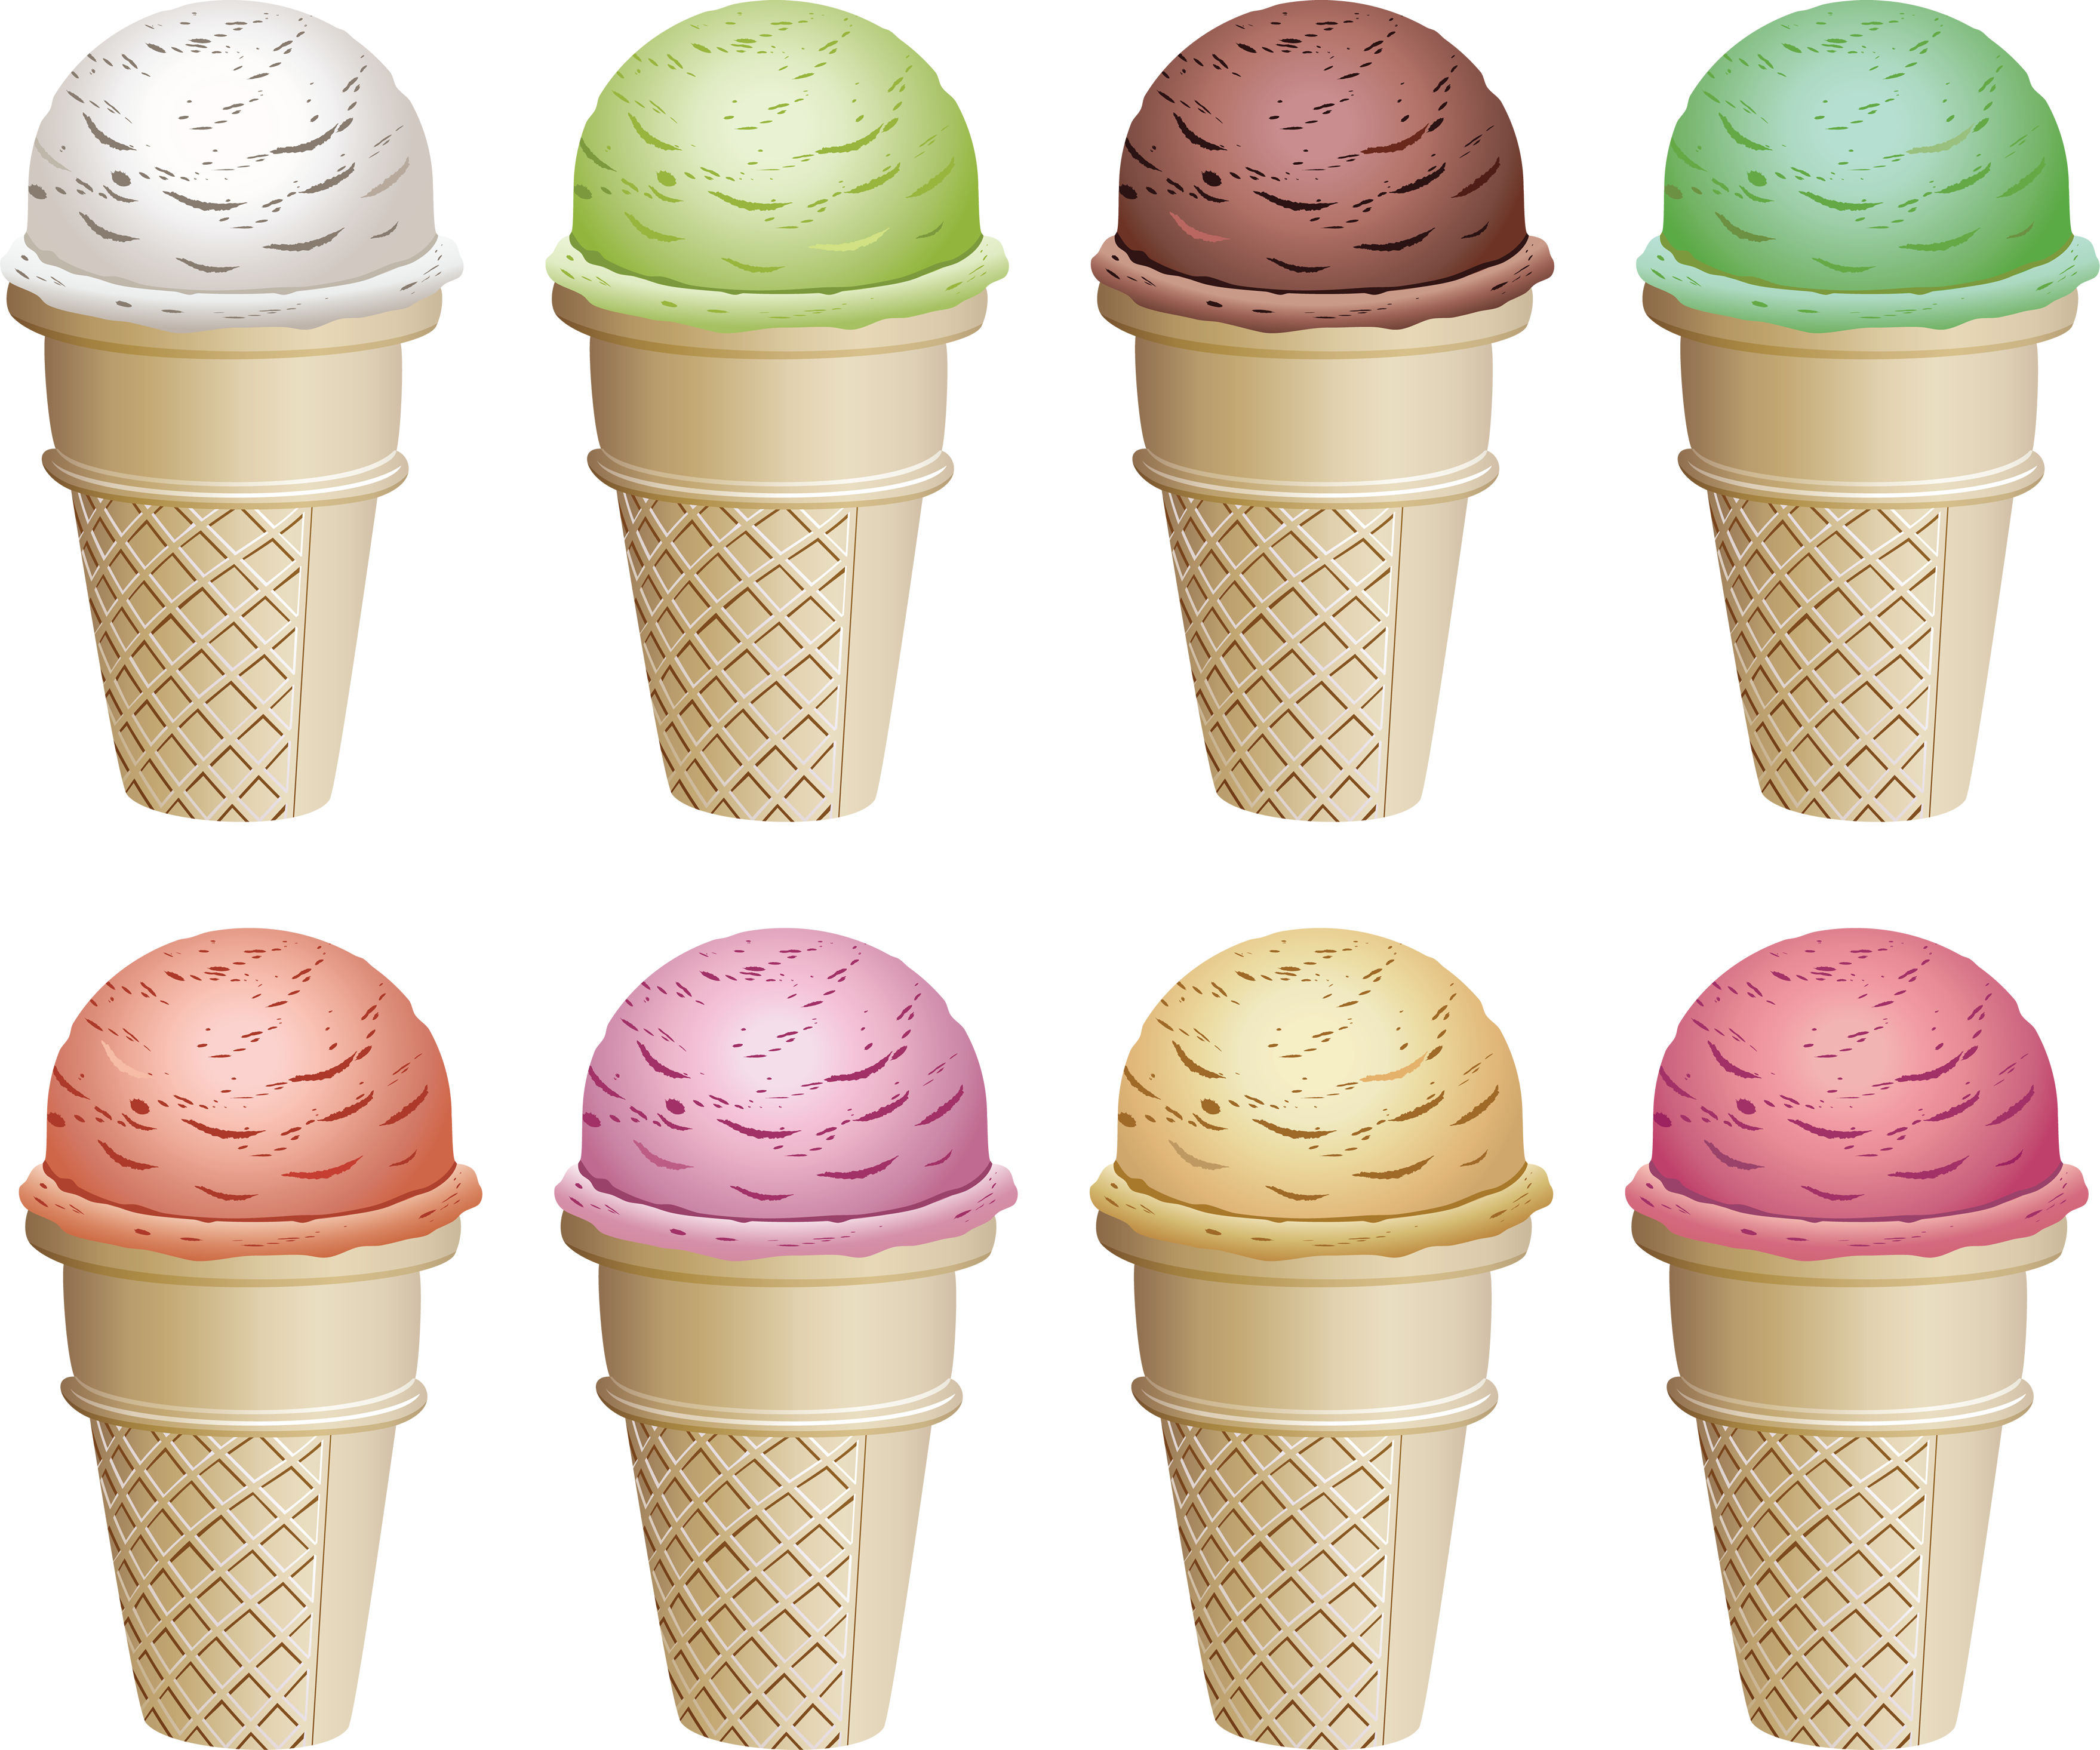 Forty five isolated stock. Watermelon clipart ice cream